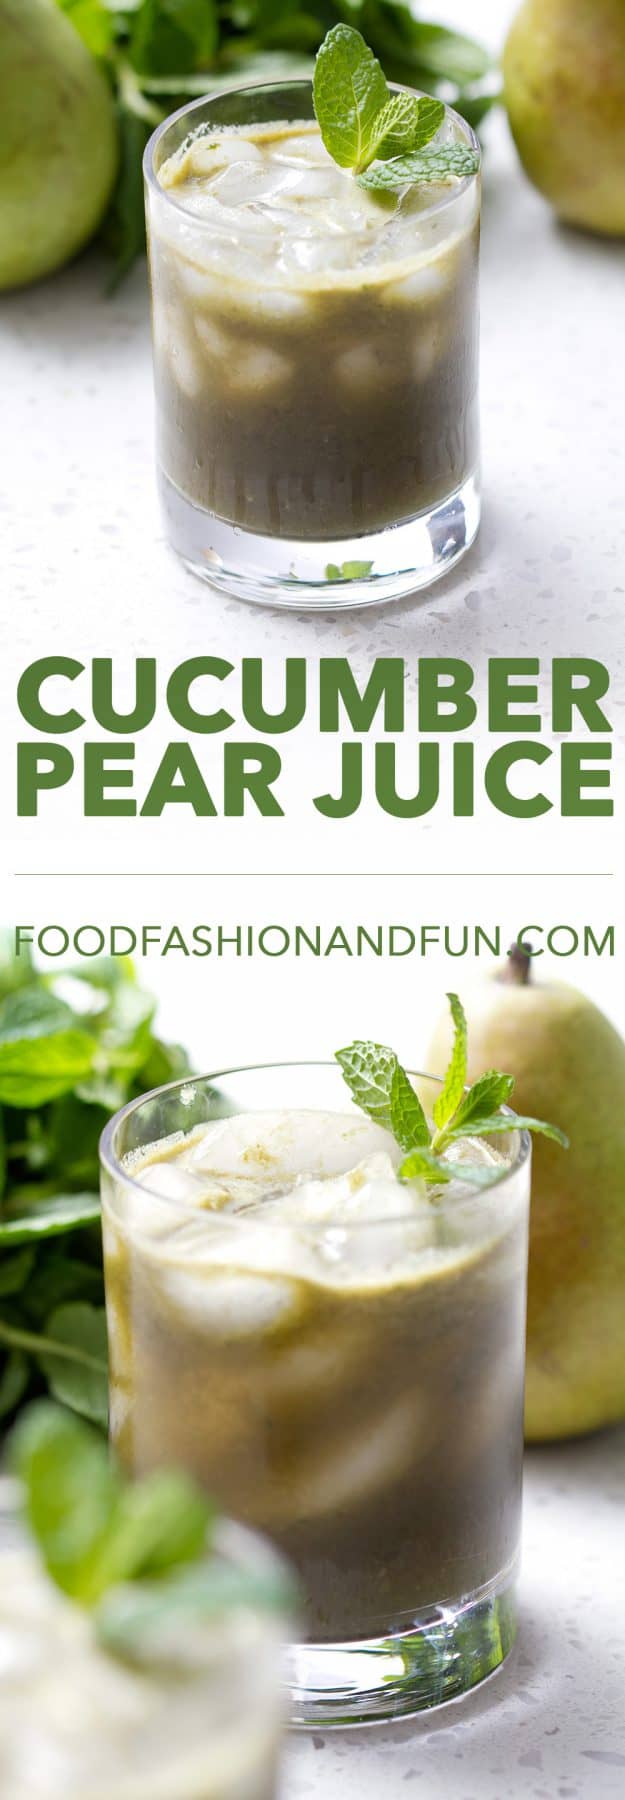 A refreshing combination of vegetable and fruit juice that is healthy and delicious. This recipe is allergy friendly (gluten, dairy, shellfish, nut, egg, and soy free) and suits the autoimmune protocol and vegan diets.